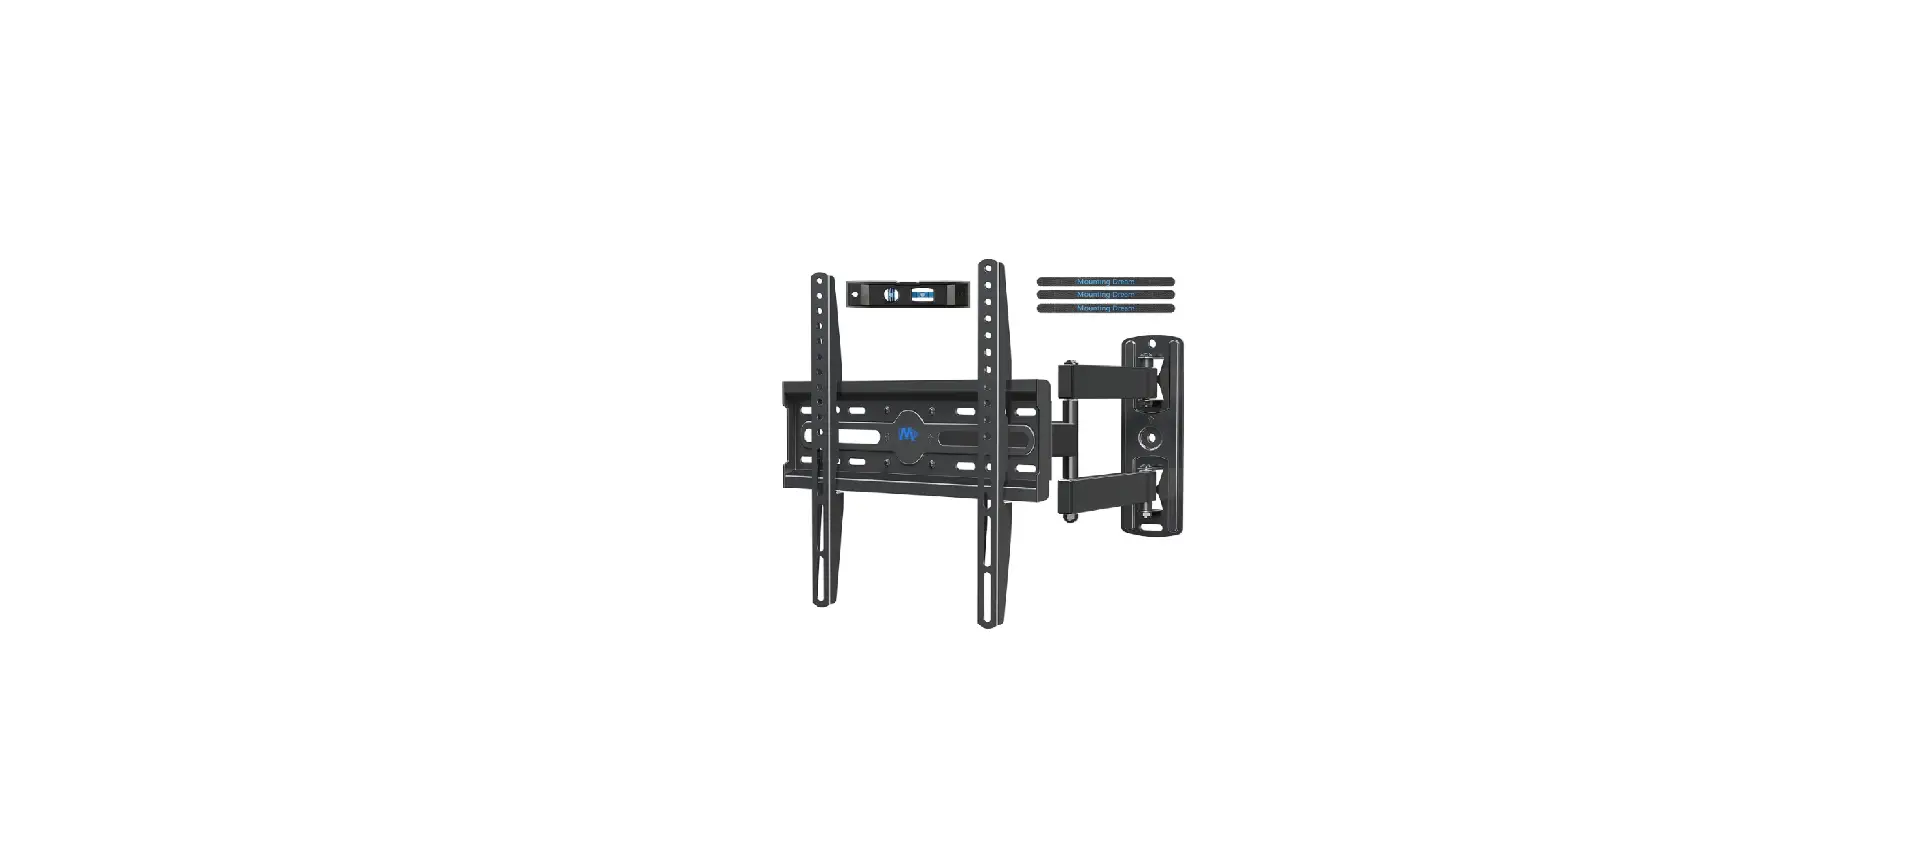 MD2377 TV Wall Mount